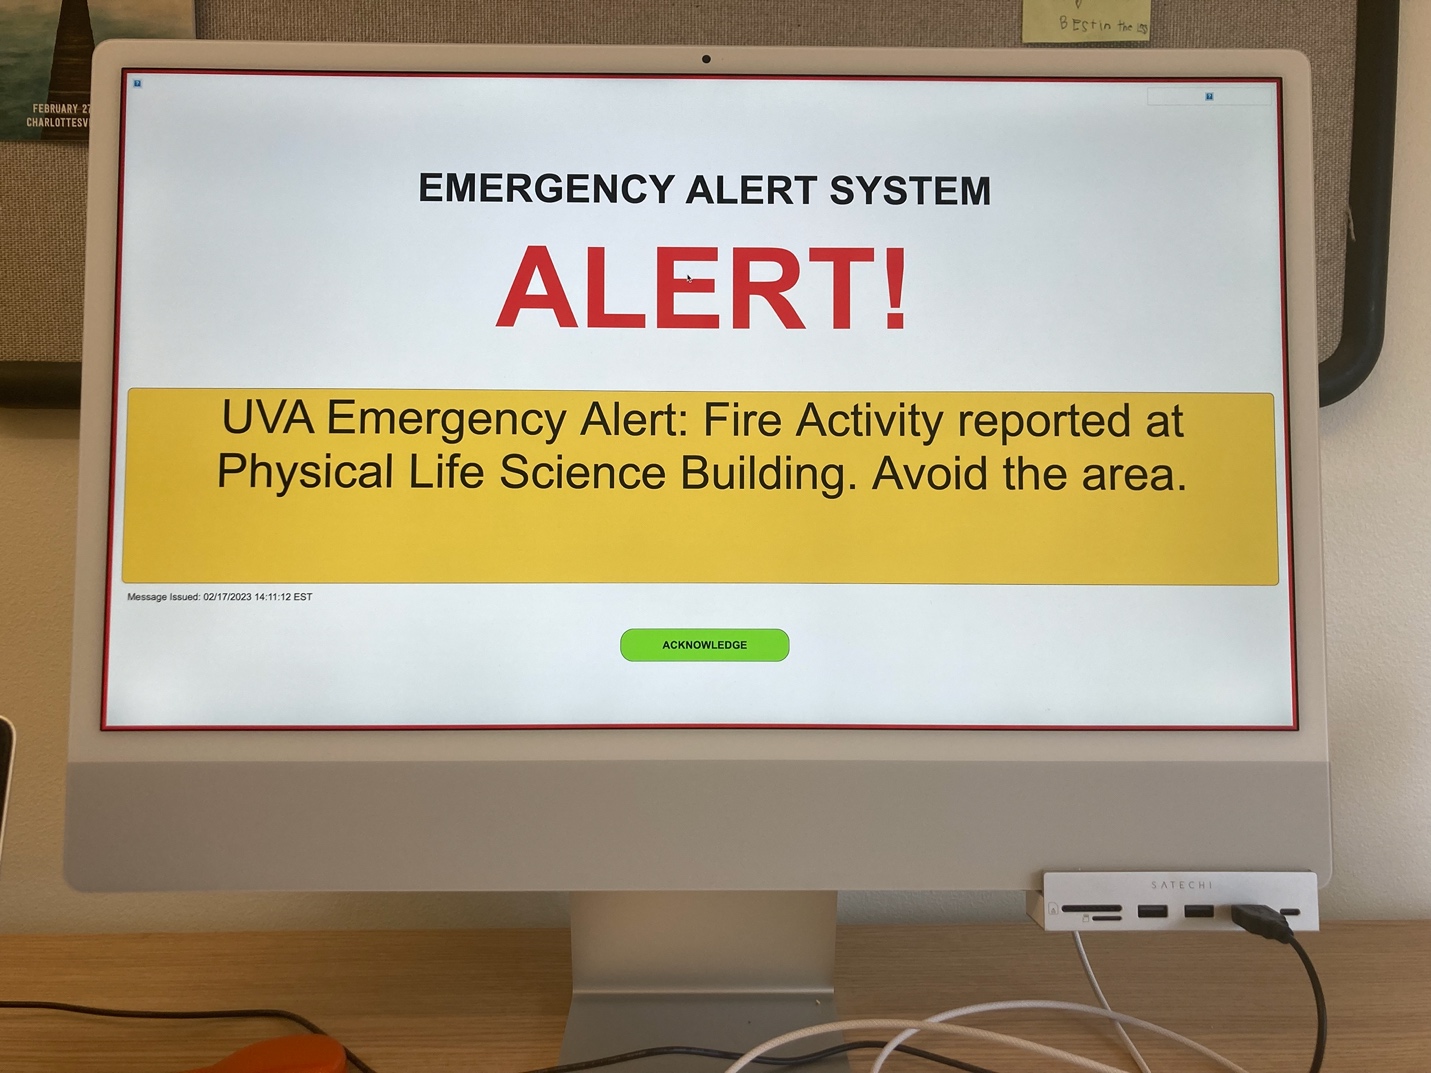 A 'desktop override' emergency alert on the author’s computer screen in a campus office, reading 'EMERGENCY ALERT SYSTEM: ALERT! UVA Emergency Alert: Fire Activity reported at Physical Life Science Building. Avoid the area.'